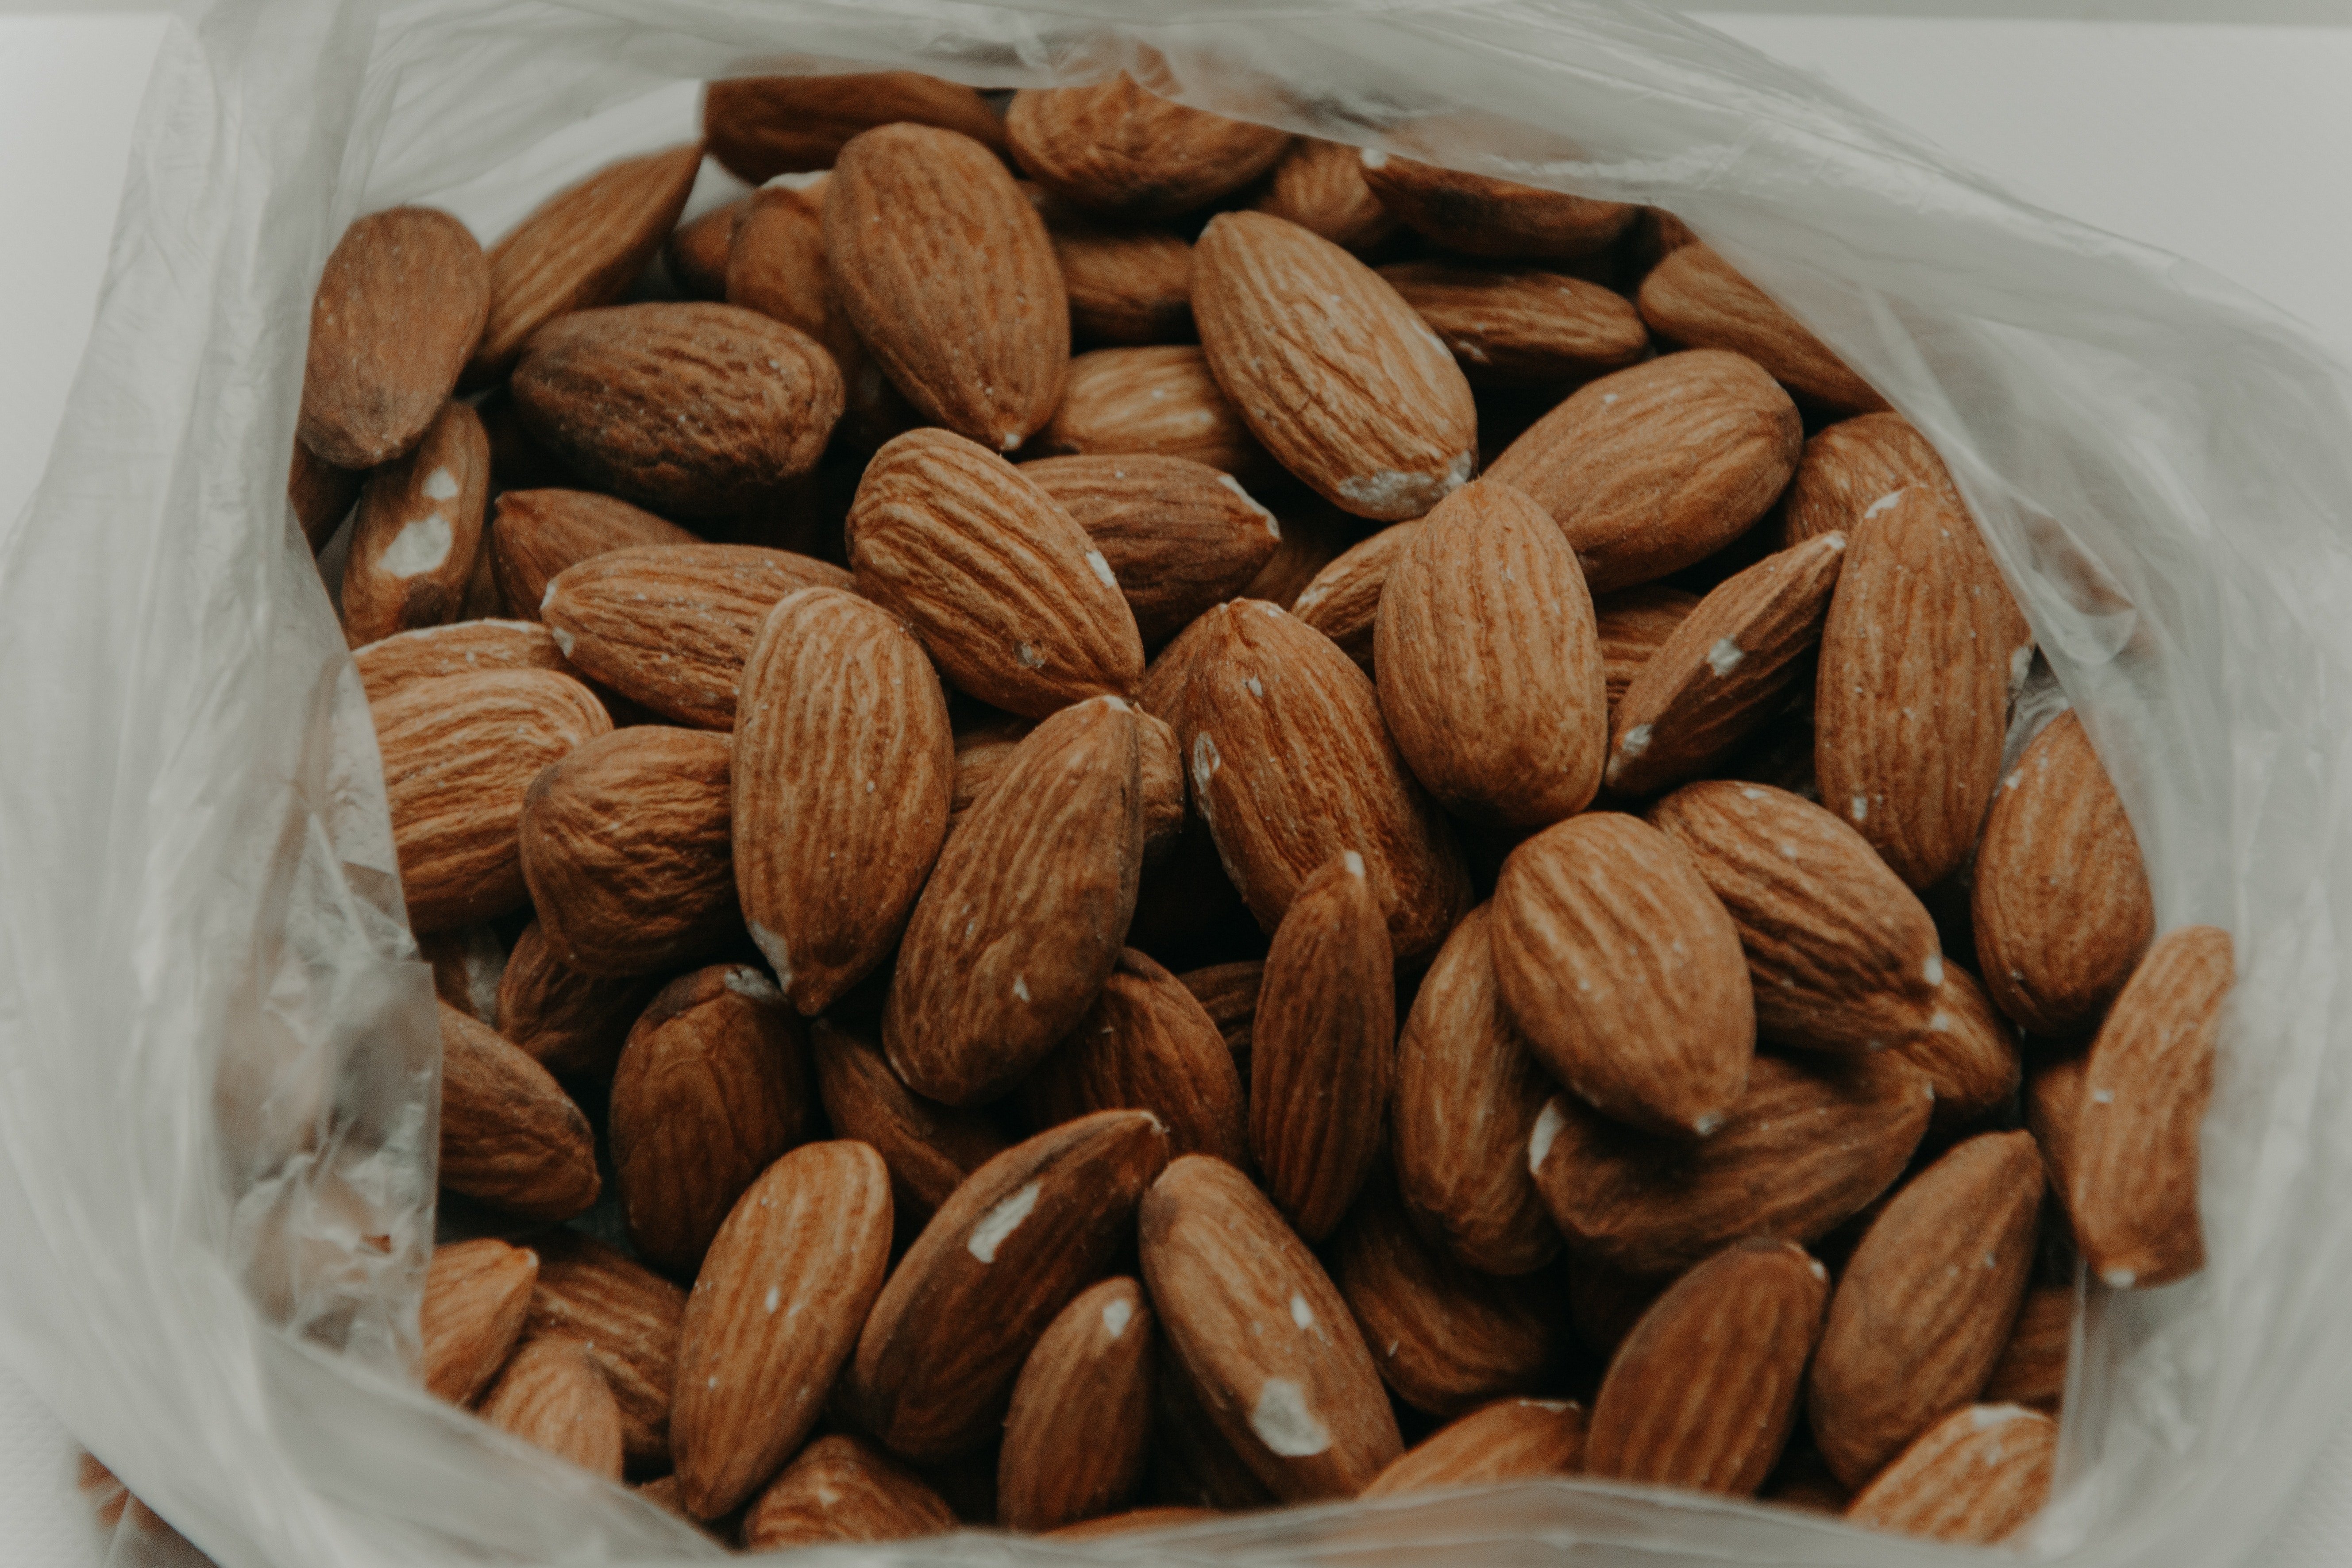 Are nuts making you fat? – Institute for Physical Activity and Nutrition